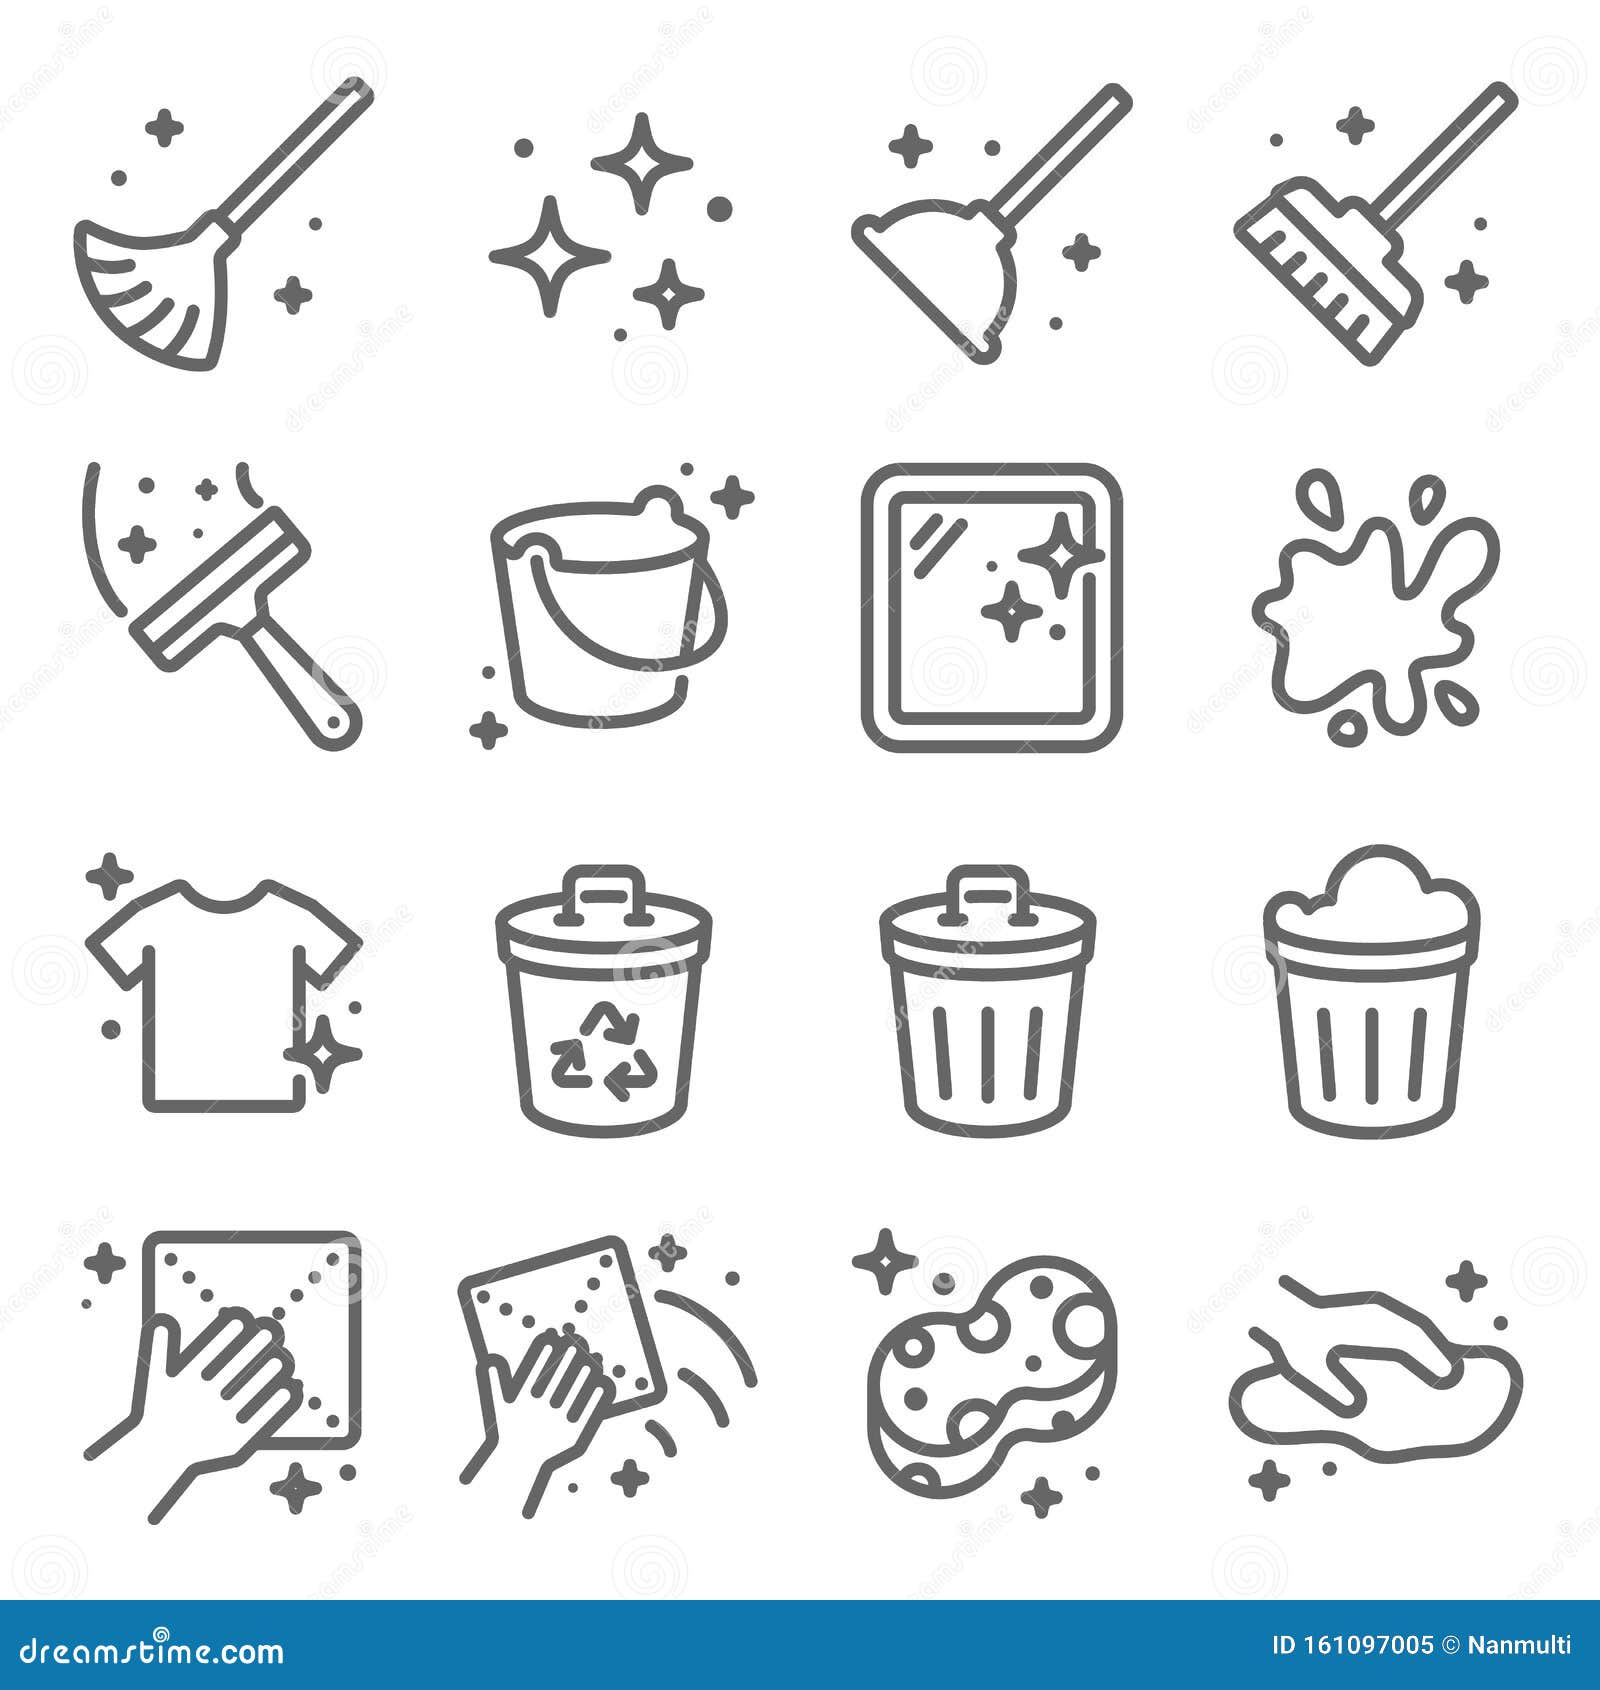 Clean Icons Set Vector Illustration Contains Such Icon As Recycle Cleaning Clean Bucket And More Expanded Stroke Stock Vector Illustration Of Soap Glove